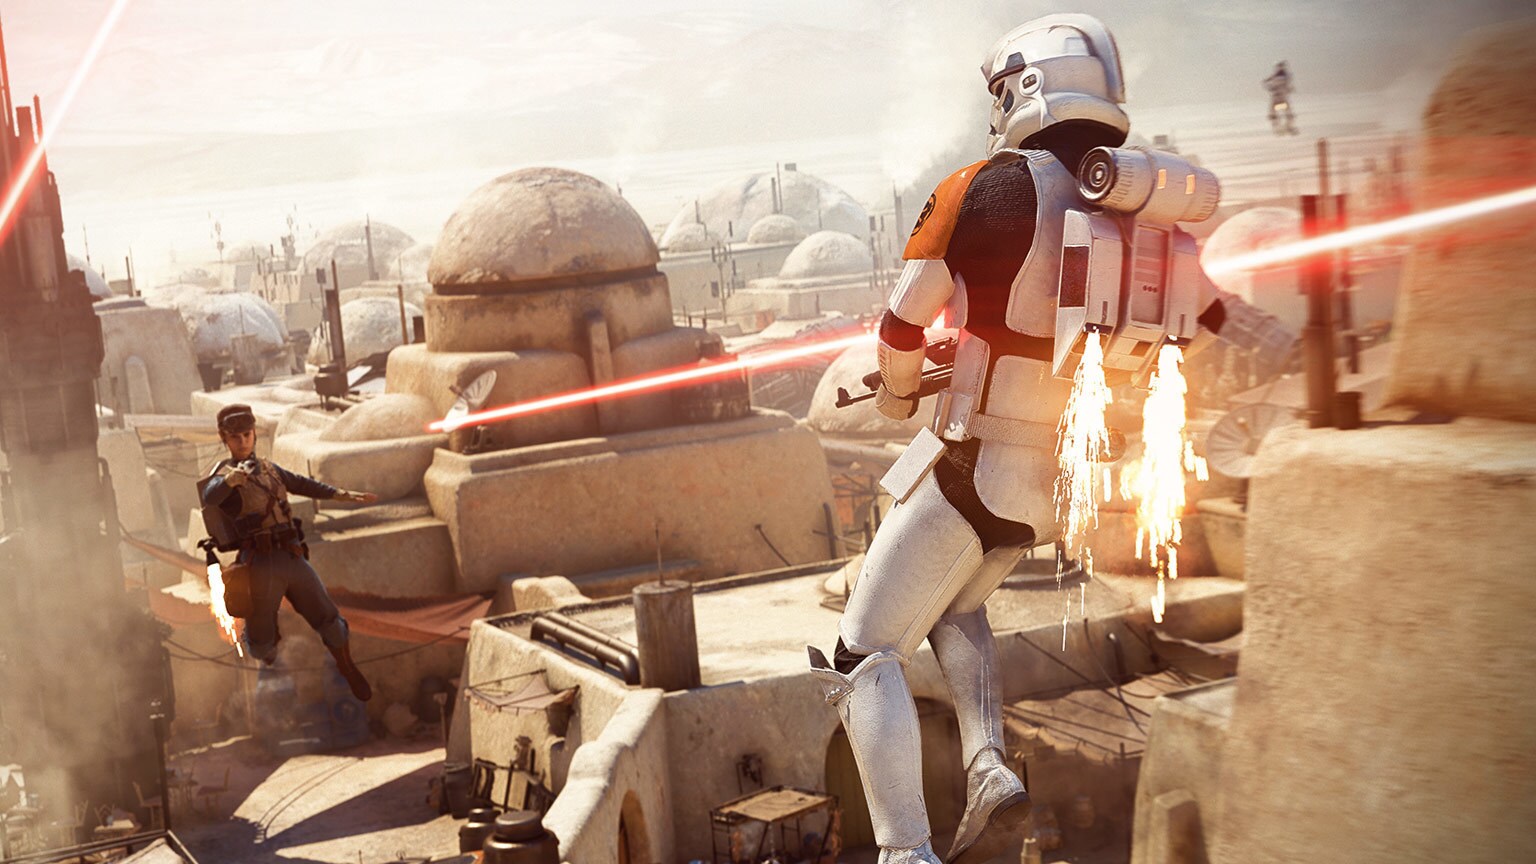 Battlefront II Update Brings New Maps, New Mode, and Most Importantly...Jetpacks